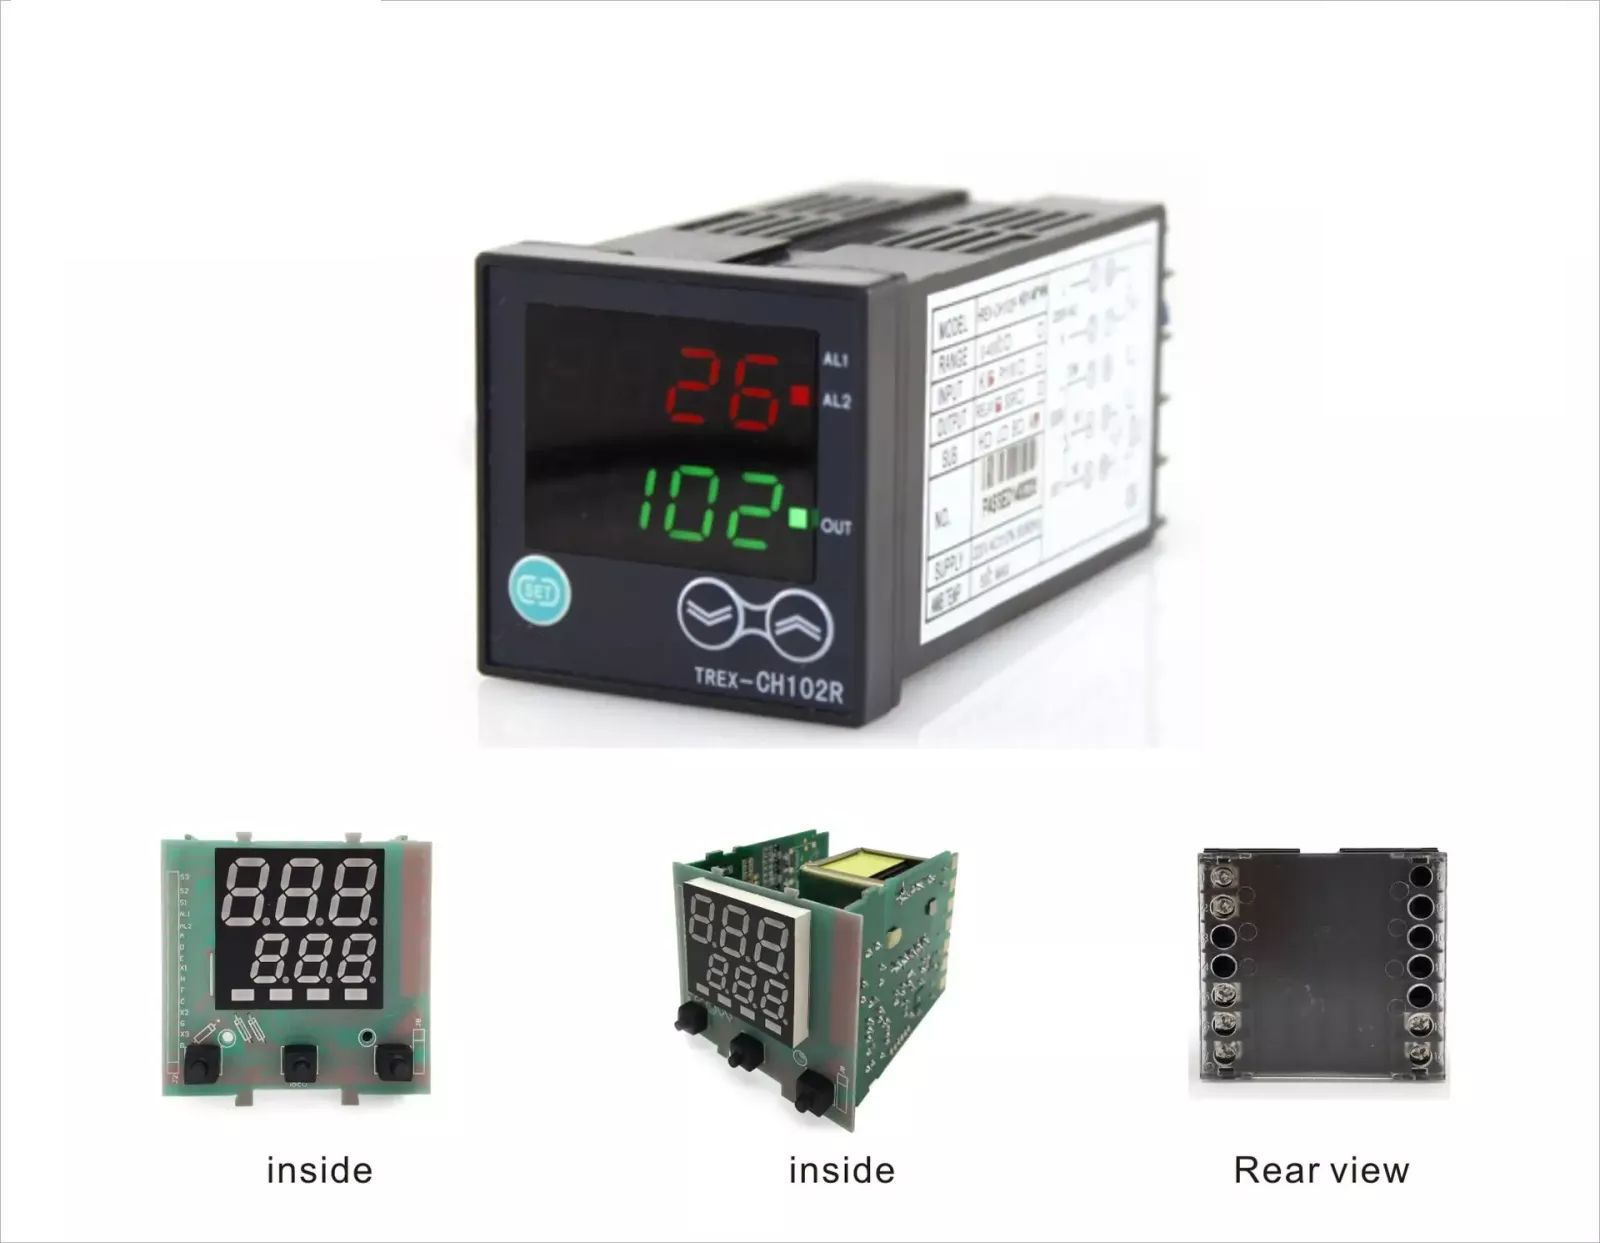 CH102R Integrated digital aiset pid temperature controller for Industrial plastic machinery